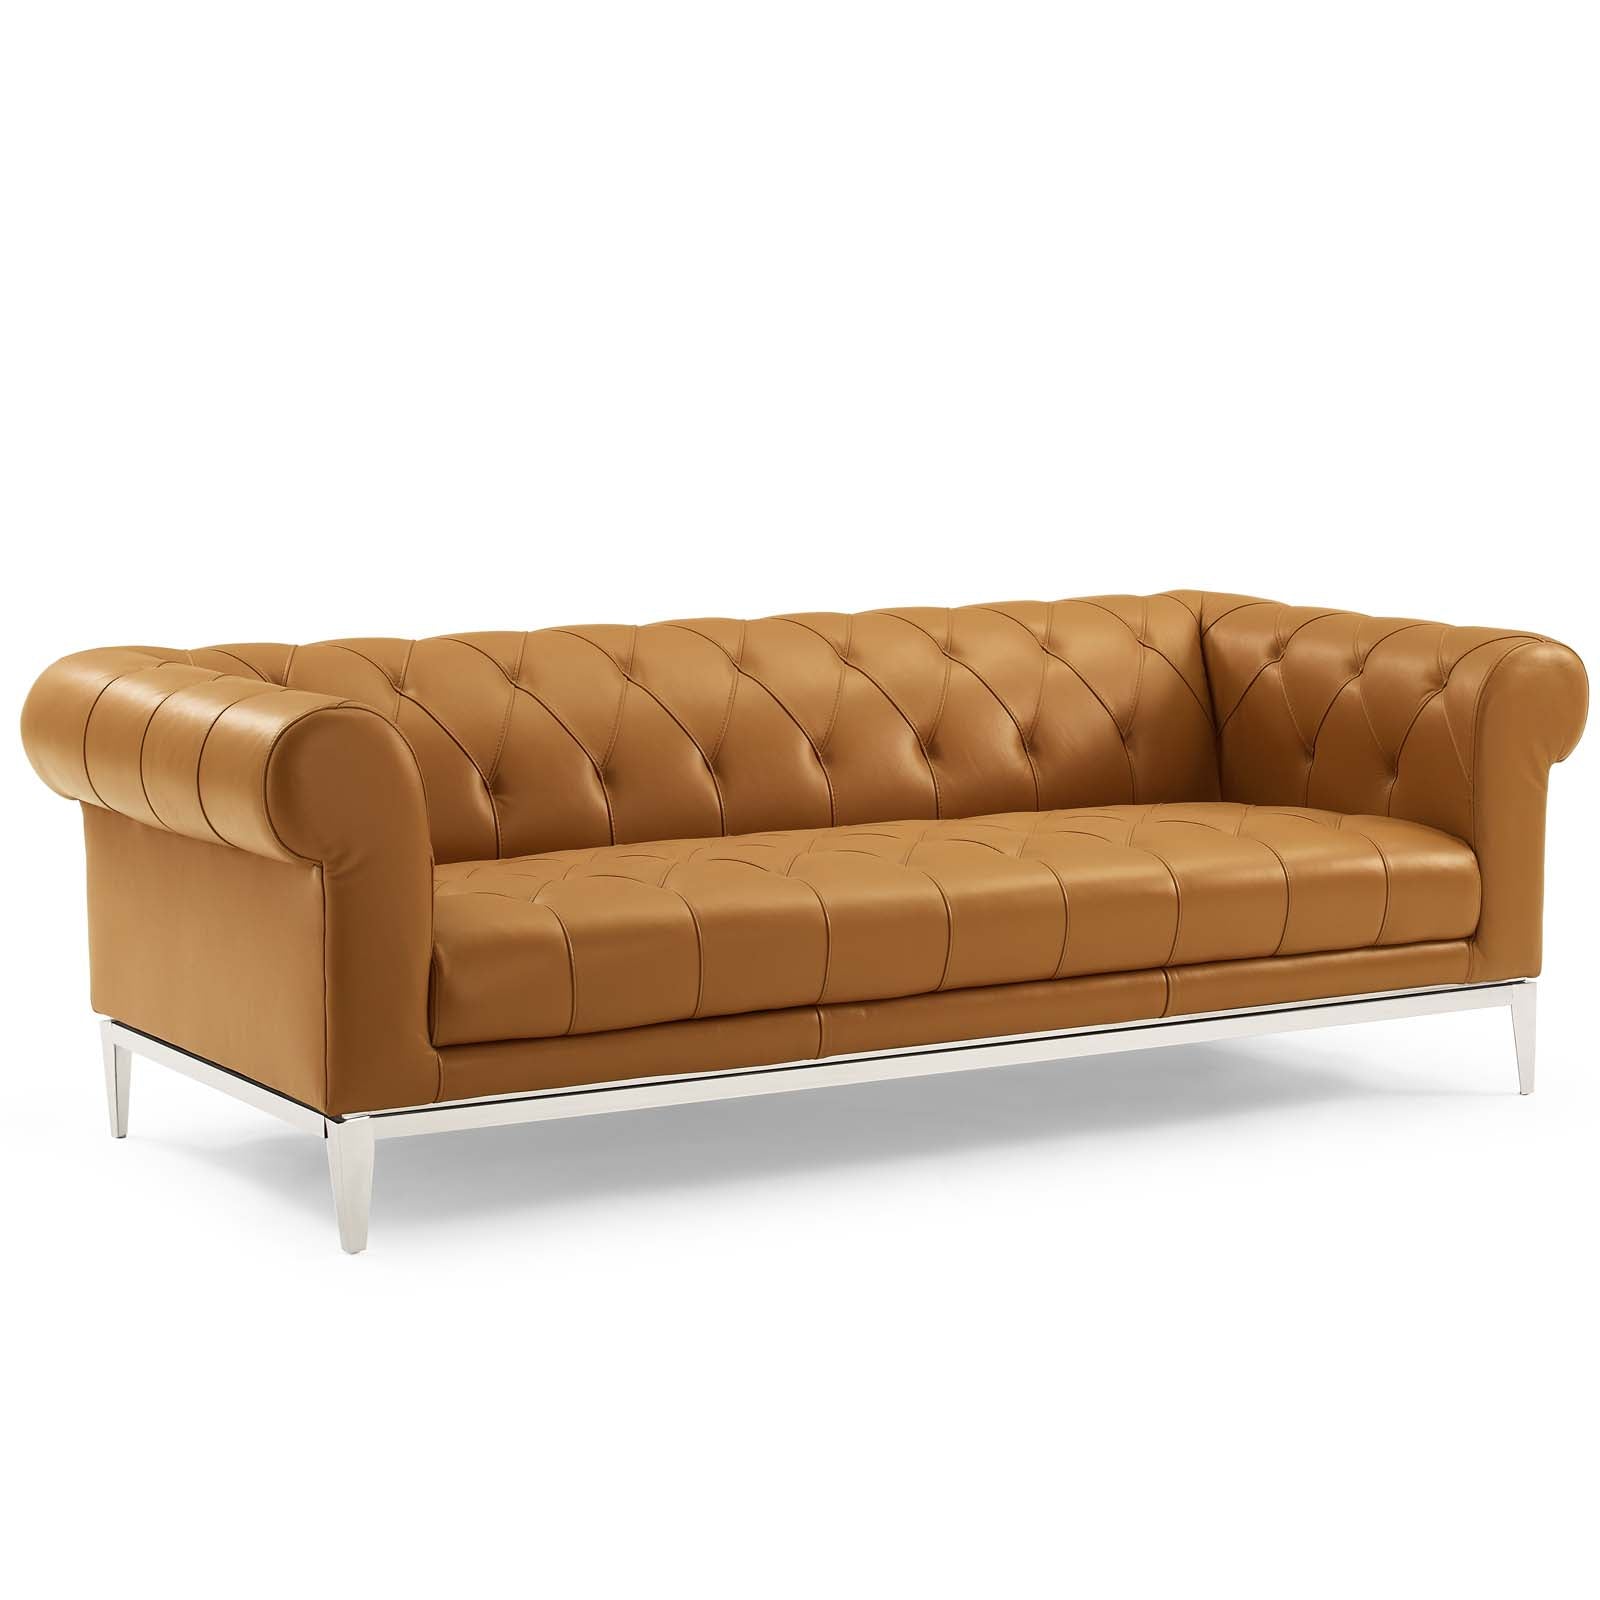 Idyll Tufted Upholstered Leather Sofa and Loveseat Set